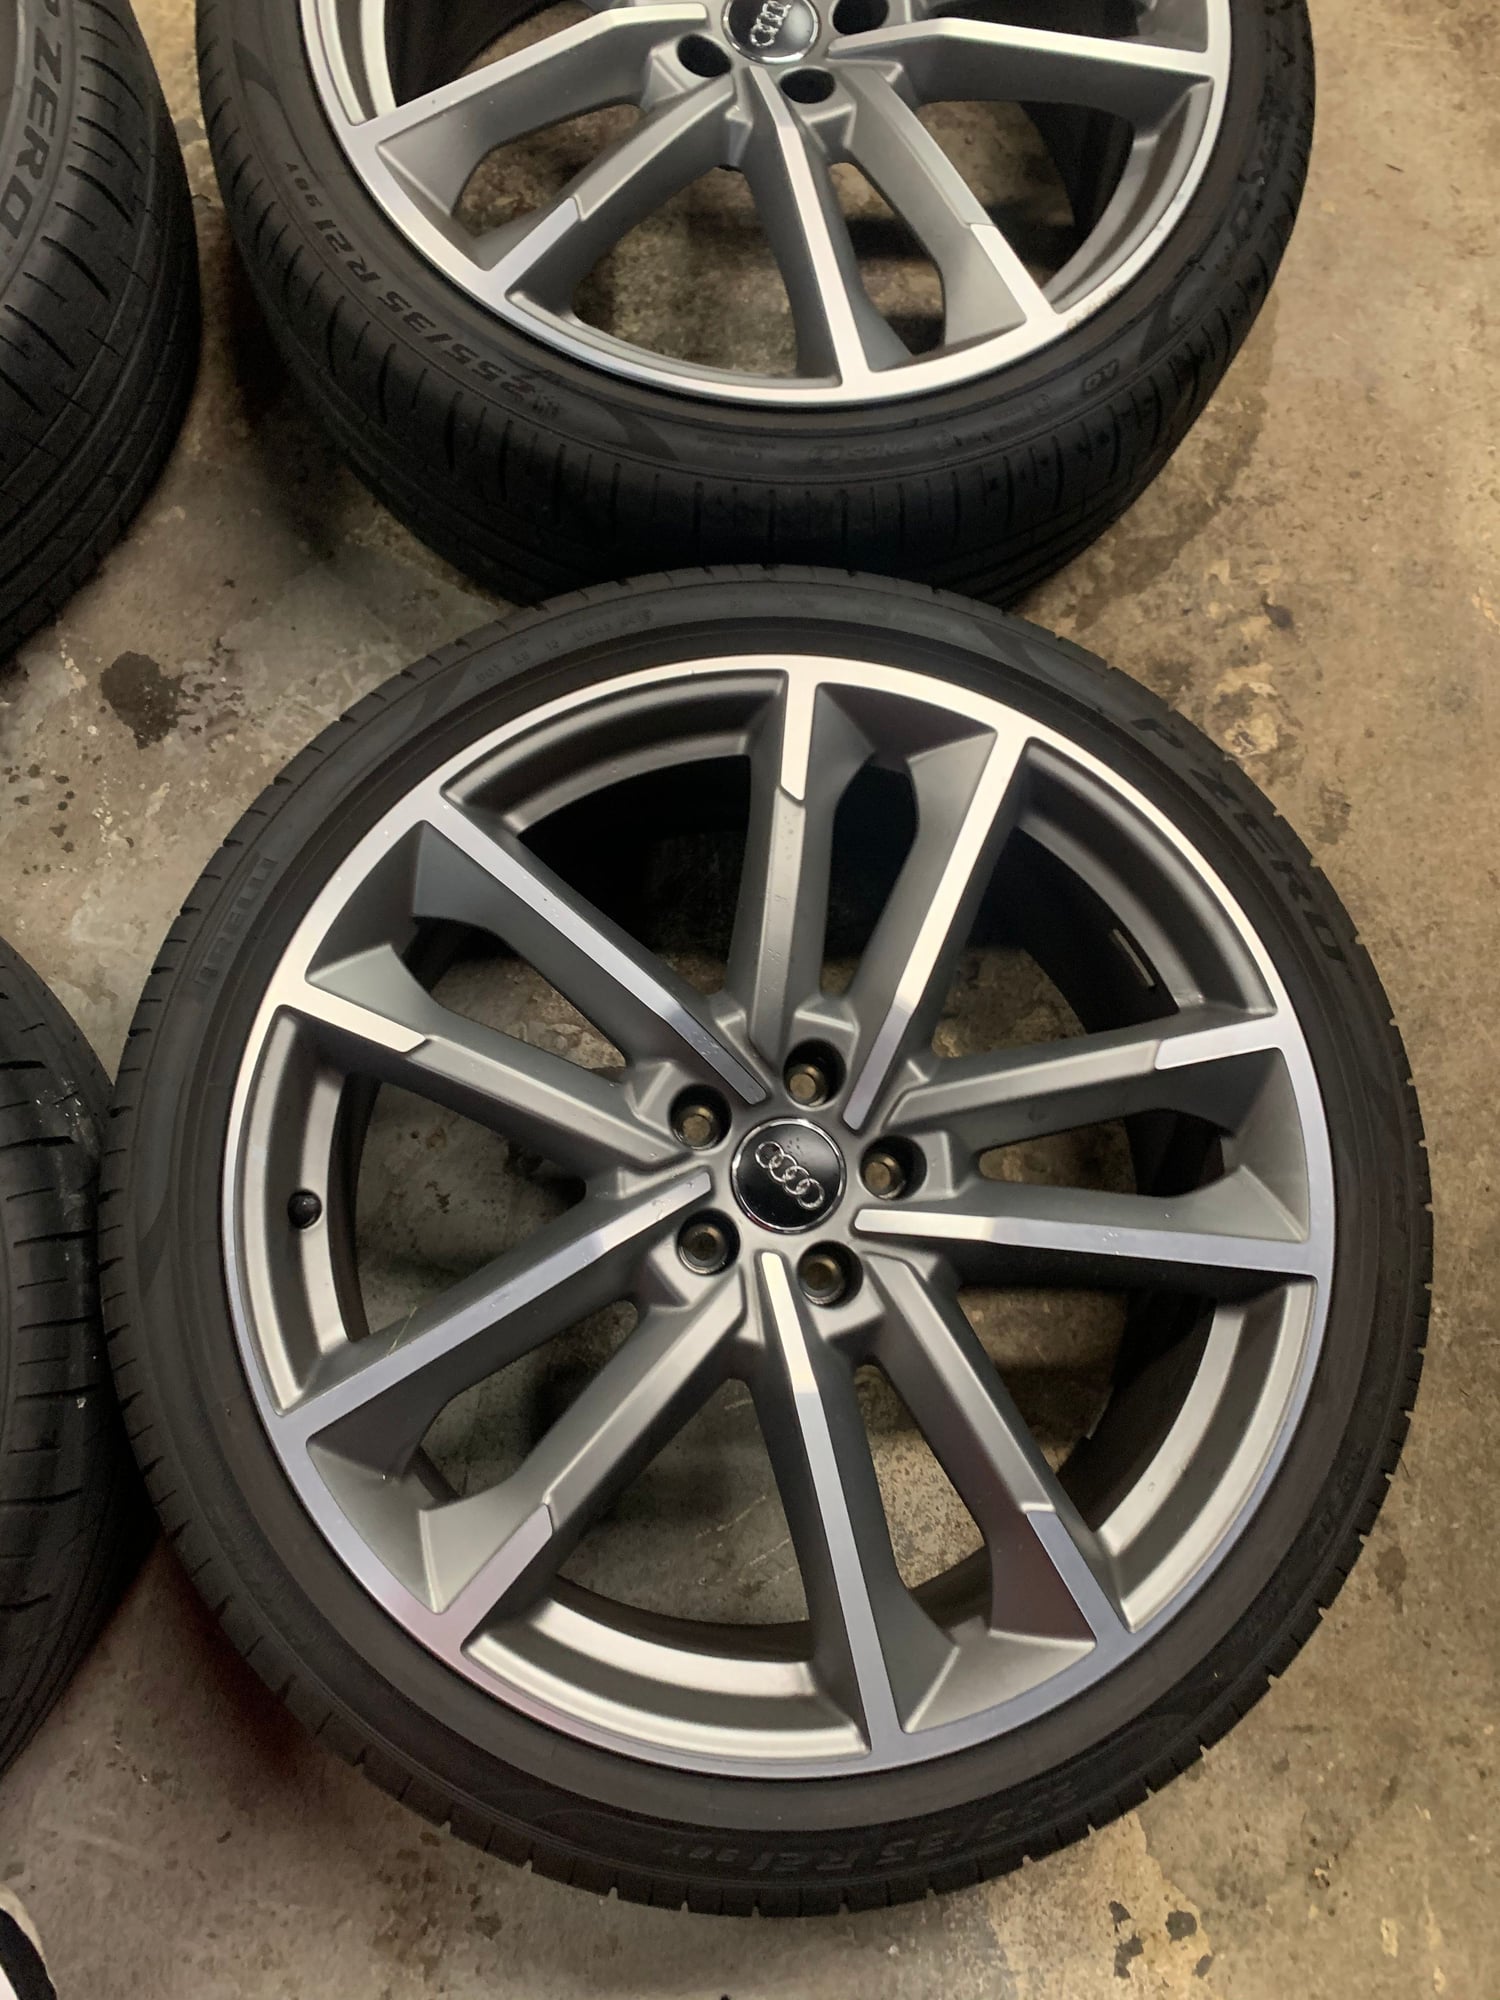 Wheels and Tires/Axles - 21 inch Rims with Tires - Used - 0  All Models - North Providence, RI 02911, United States